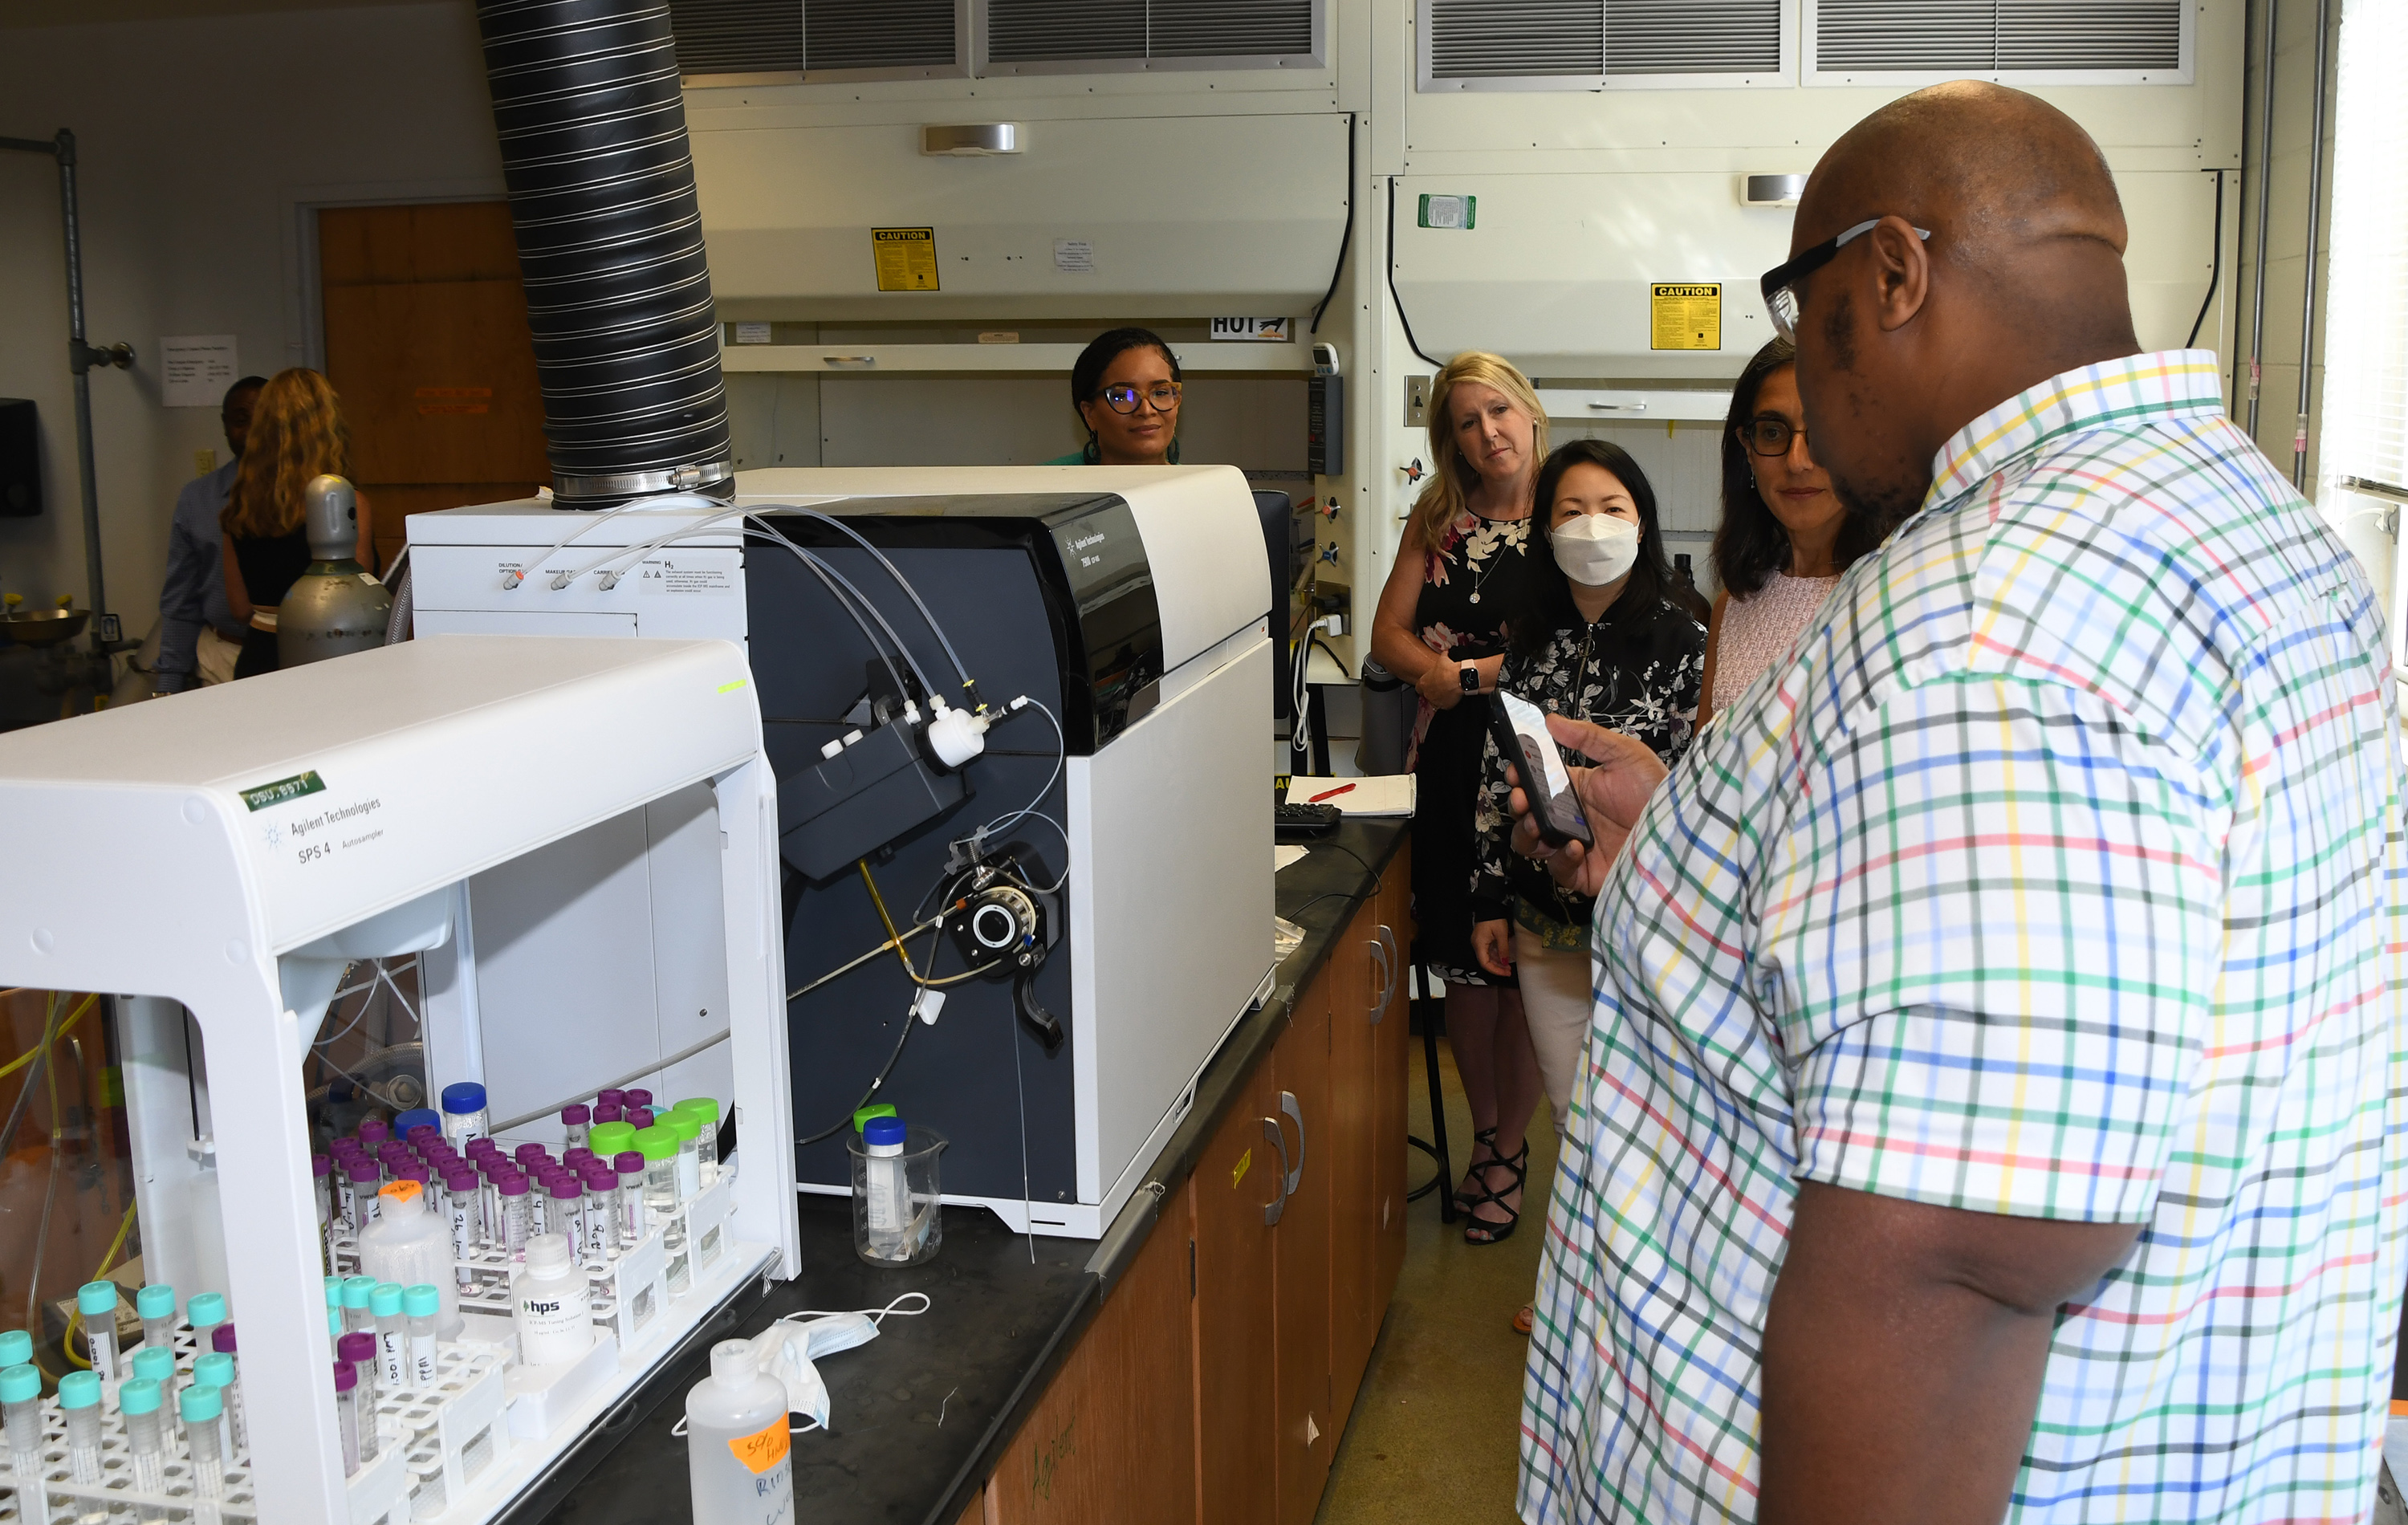 A University graduate student shows Agilent reps some of the laboratory technology in the Mishoe Science Center.